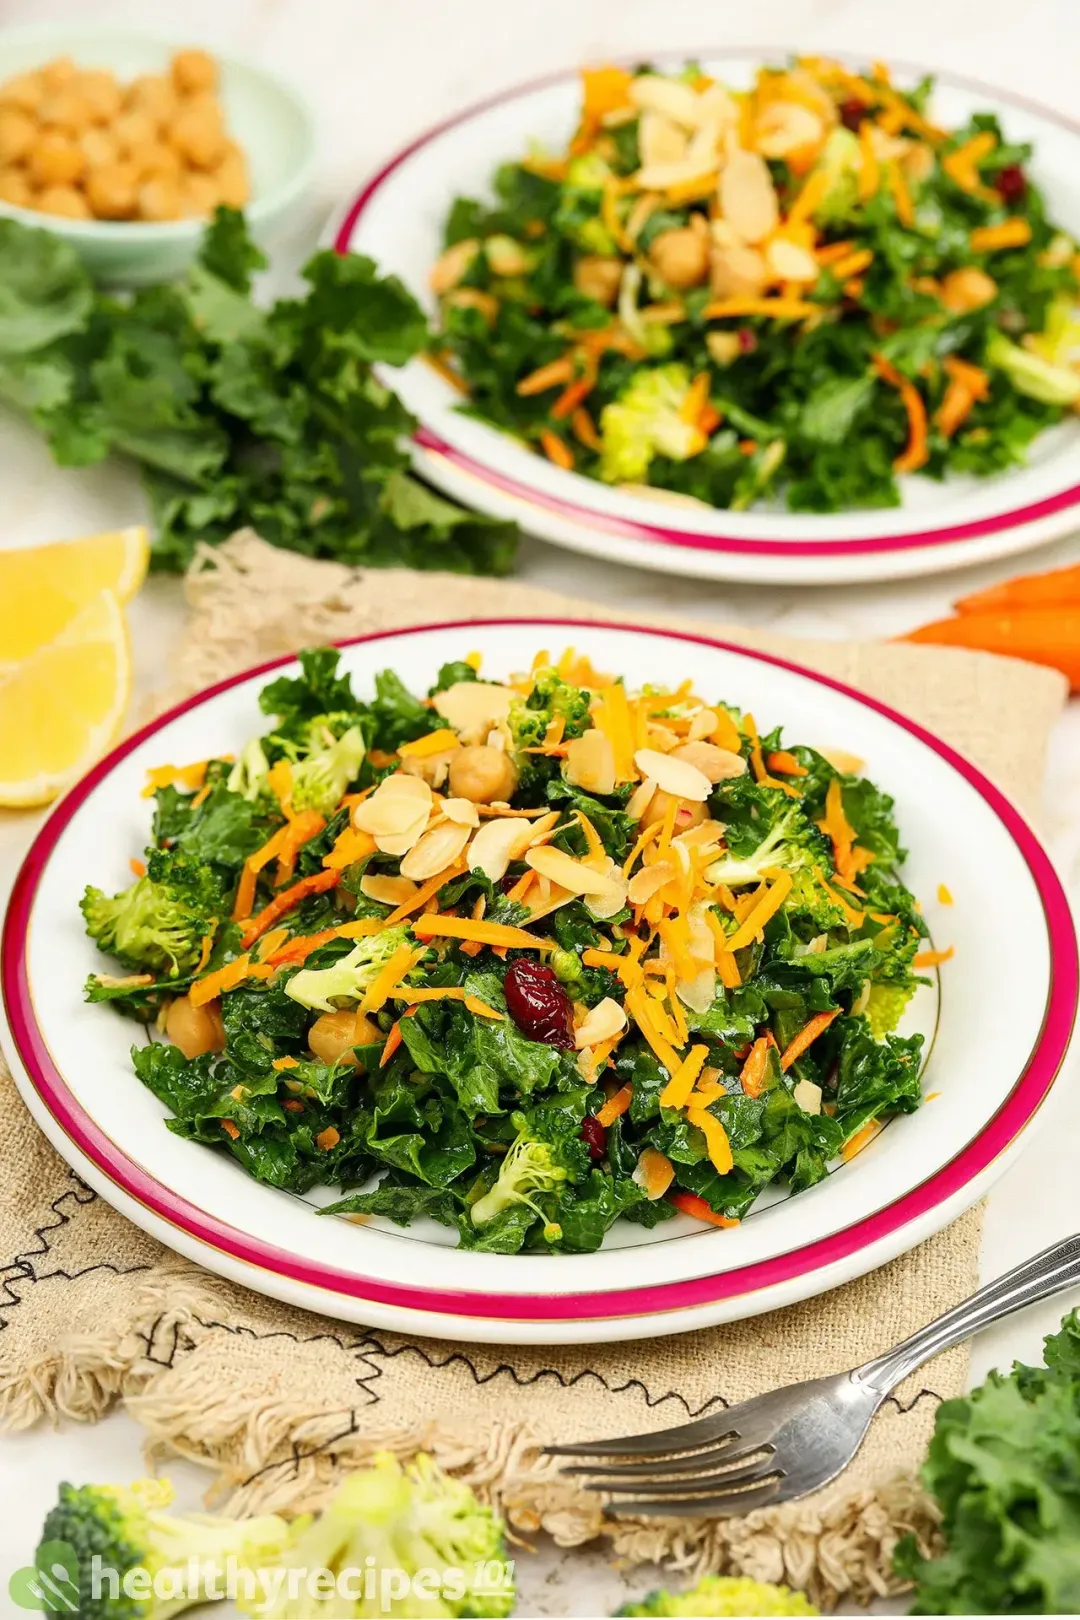 How to Prepare Kale for Salad